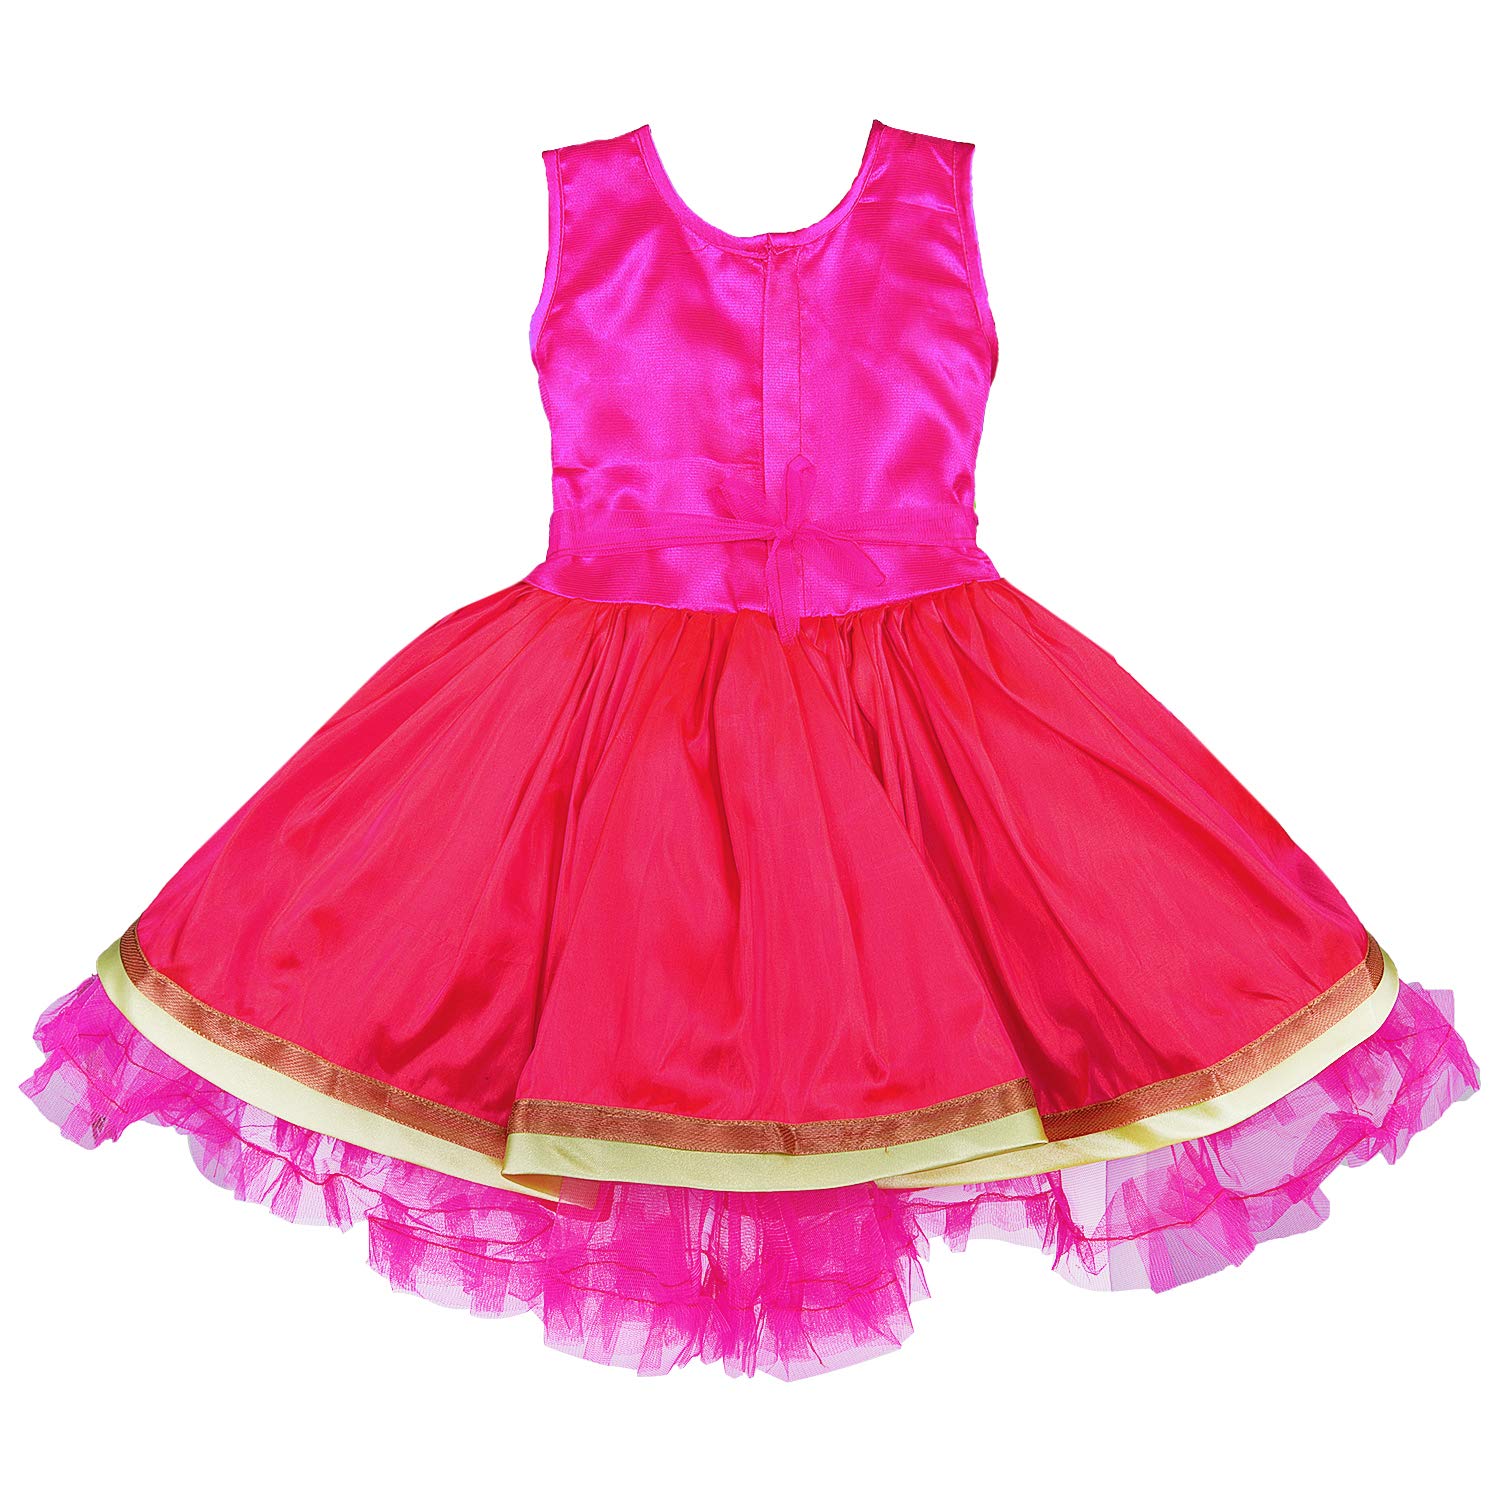 Baby Girls Party Wear Frock Birthday Dress For Girls fe2651pnk - Wish Karo Party Wear - frocks Party Wear - baby dress